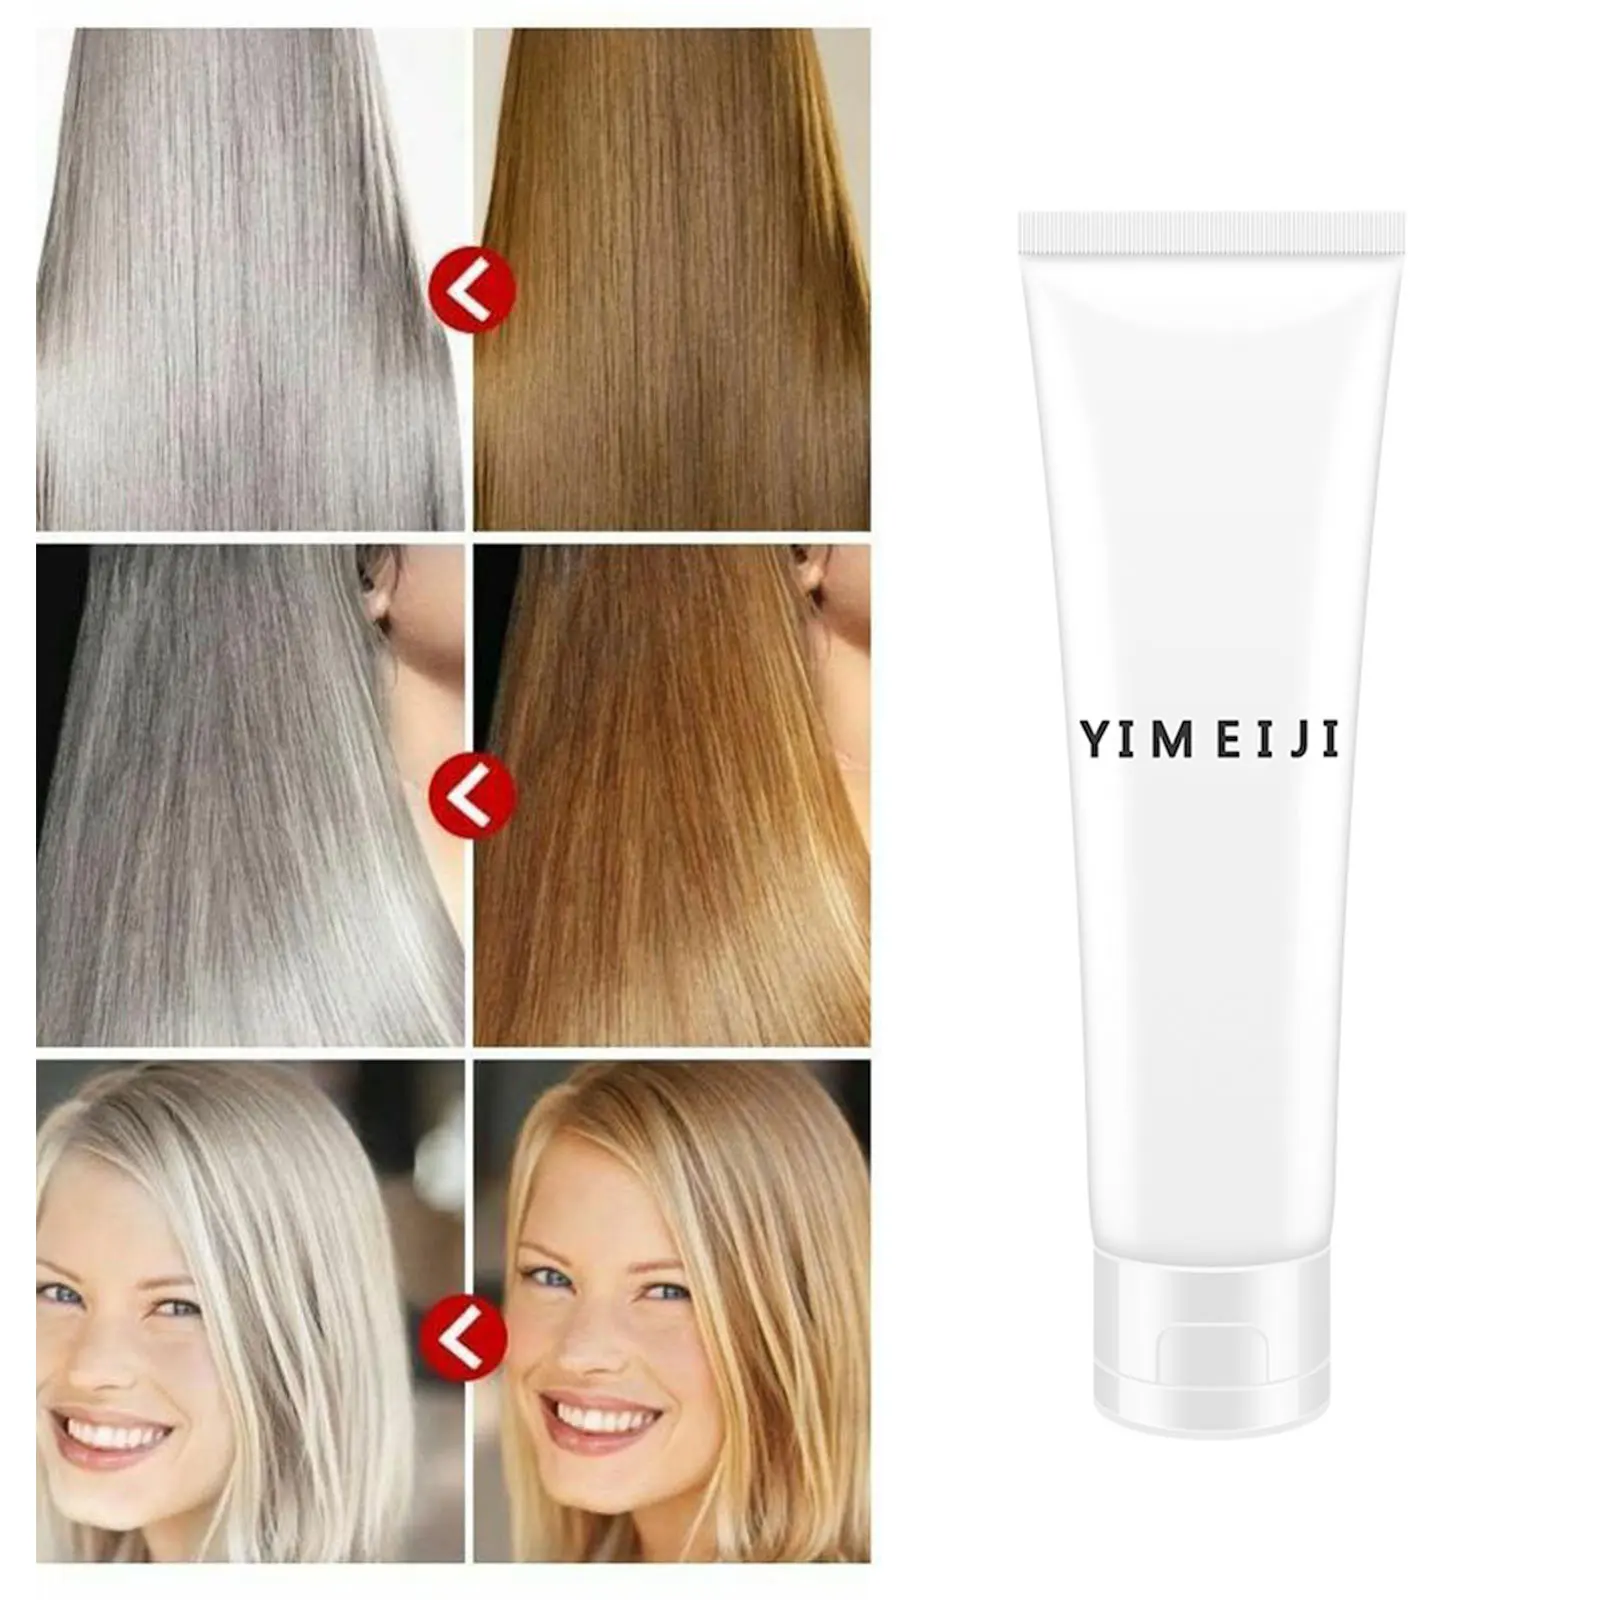 

Professional Blonde Bleached Highlighted Shampoo Revitalize Effective Purple Shampoo For Blonde Hair Shampoos Remove Yellow